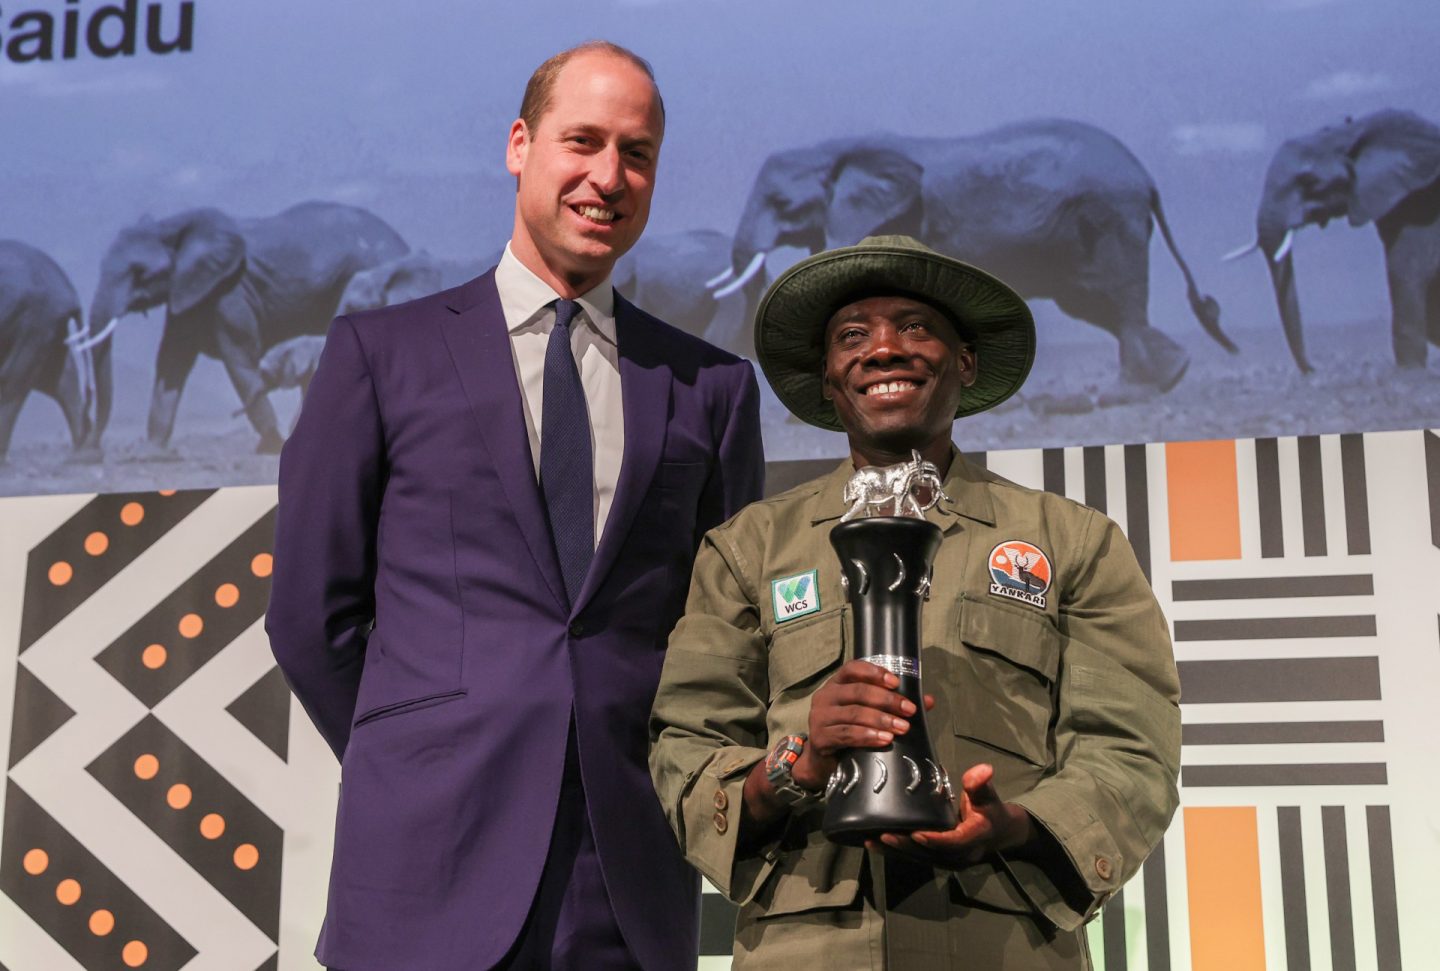 (L-R) Prince William, Duke of Cambridge and Suleiman Saidu during the Tusk Conservation Awards 2021 at BFI Southbank on November 22, 2021 in London, England